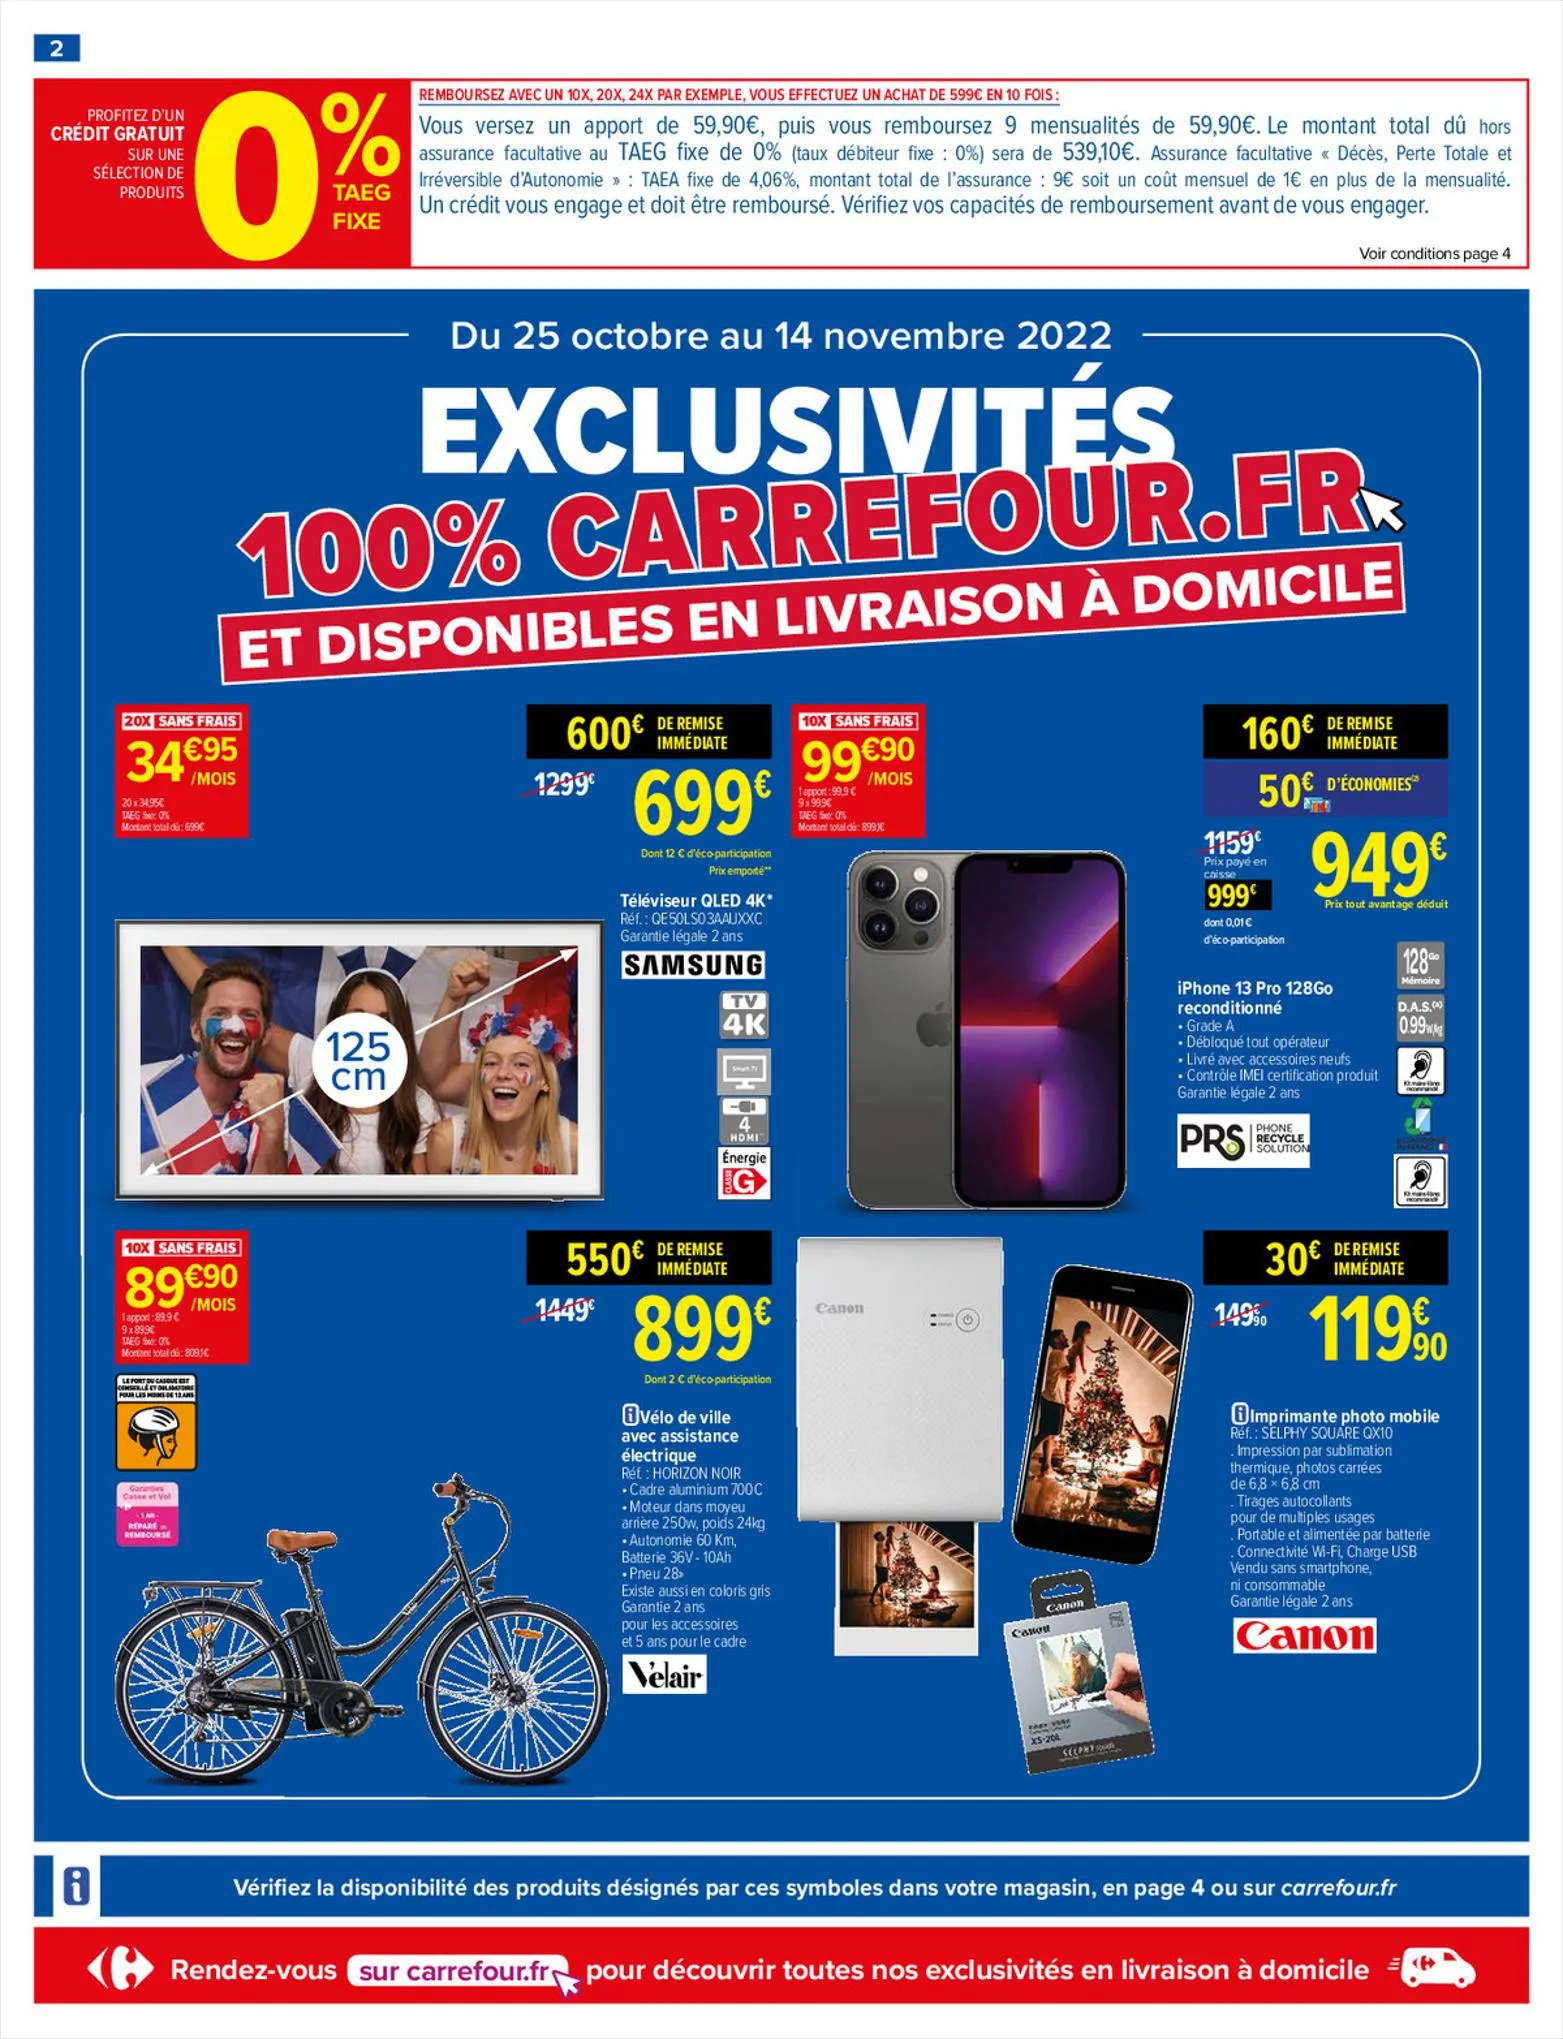 Catalogue Carrefour supporter des supporters, page 00002